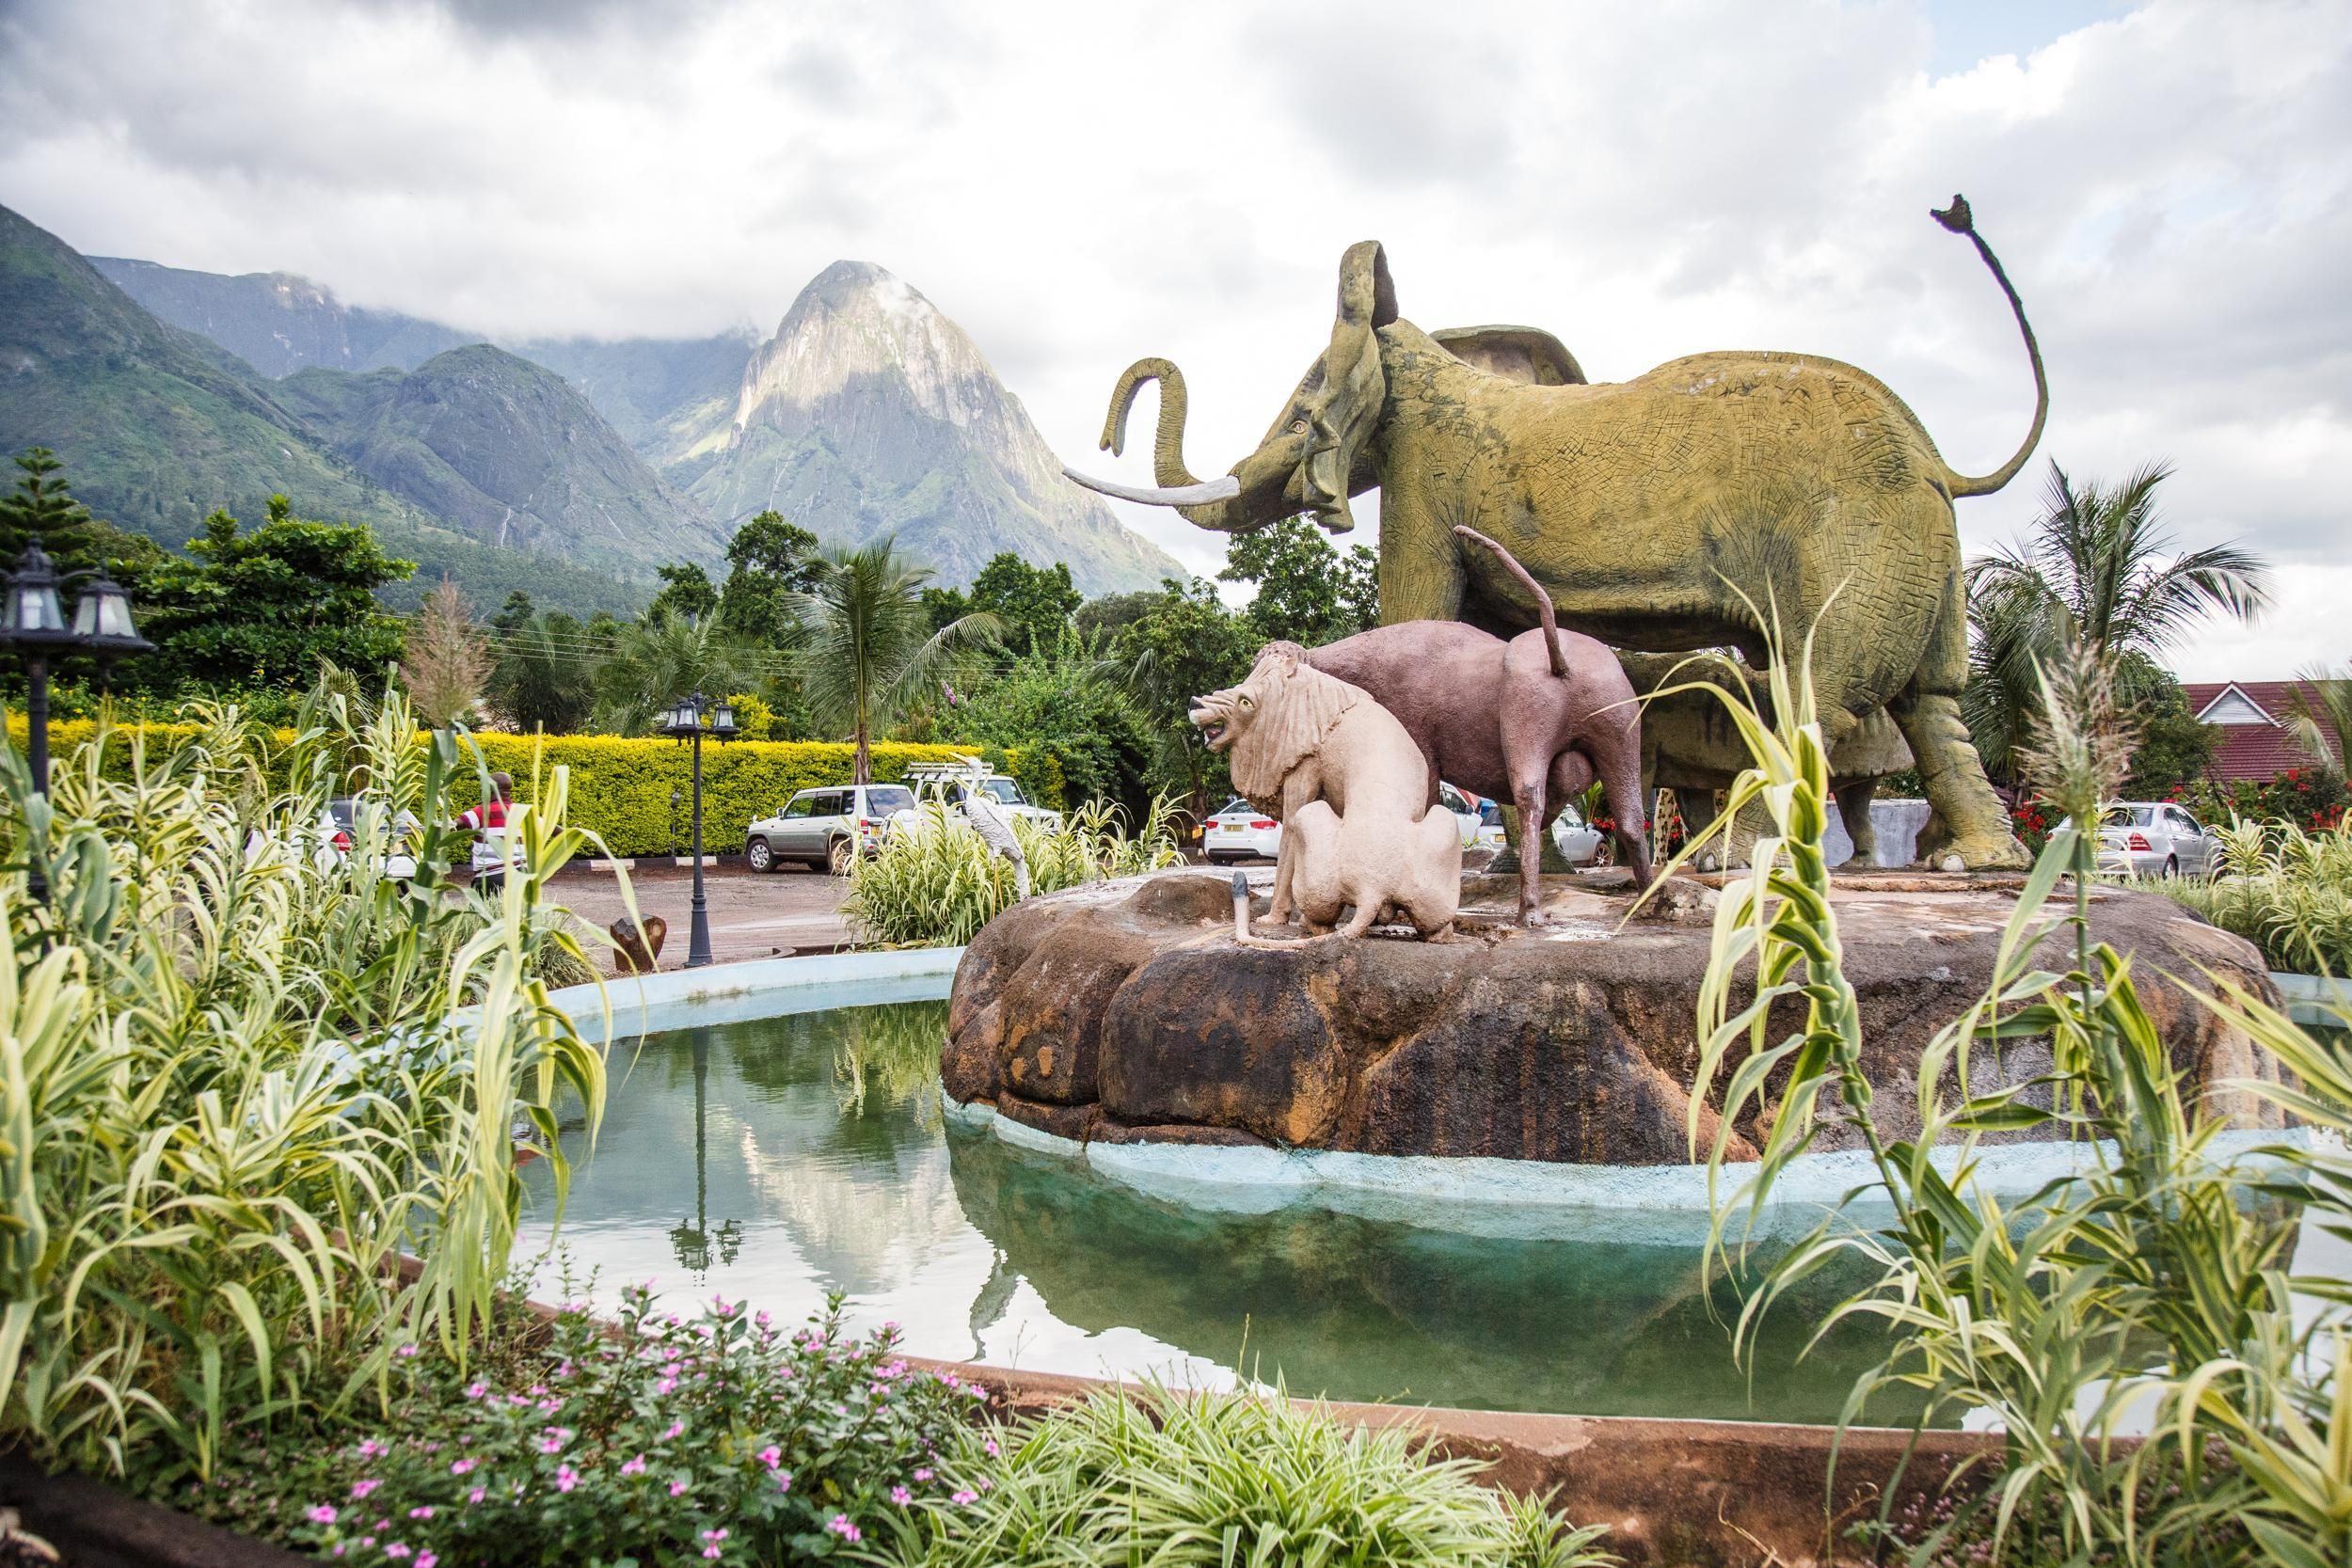 A statue of Africa’s ‘Big Five’ towers in front of the ‘Hapuwani Village Lodge’, a luxurious resort in Mulanje, in the south of Malawi. Image by Nathalie Bertrams. Malawi, 2017.